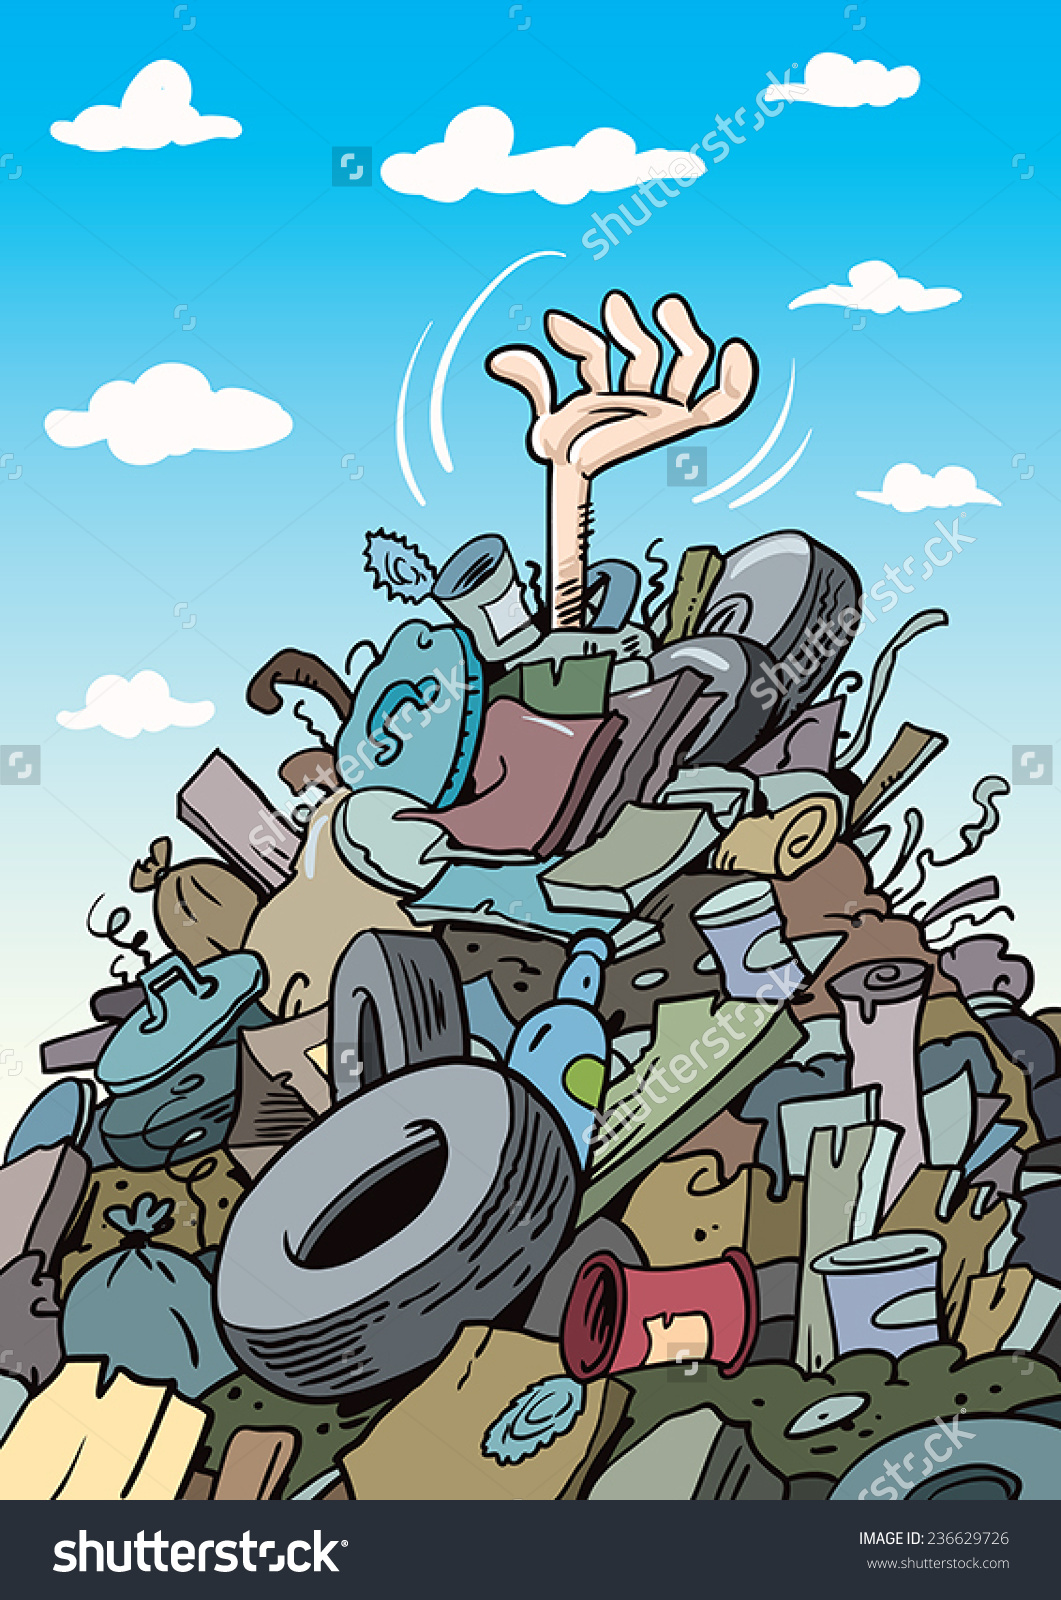 Junk removal clipart.